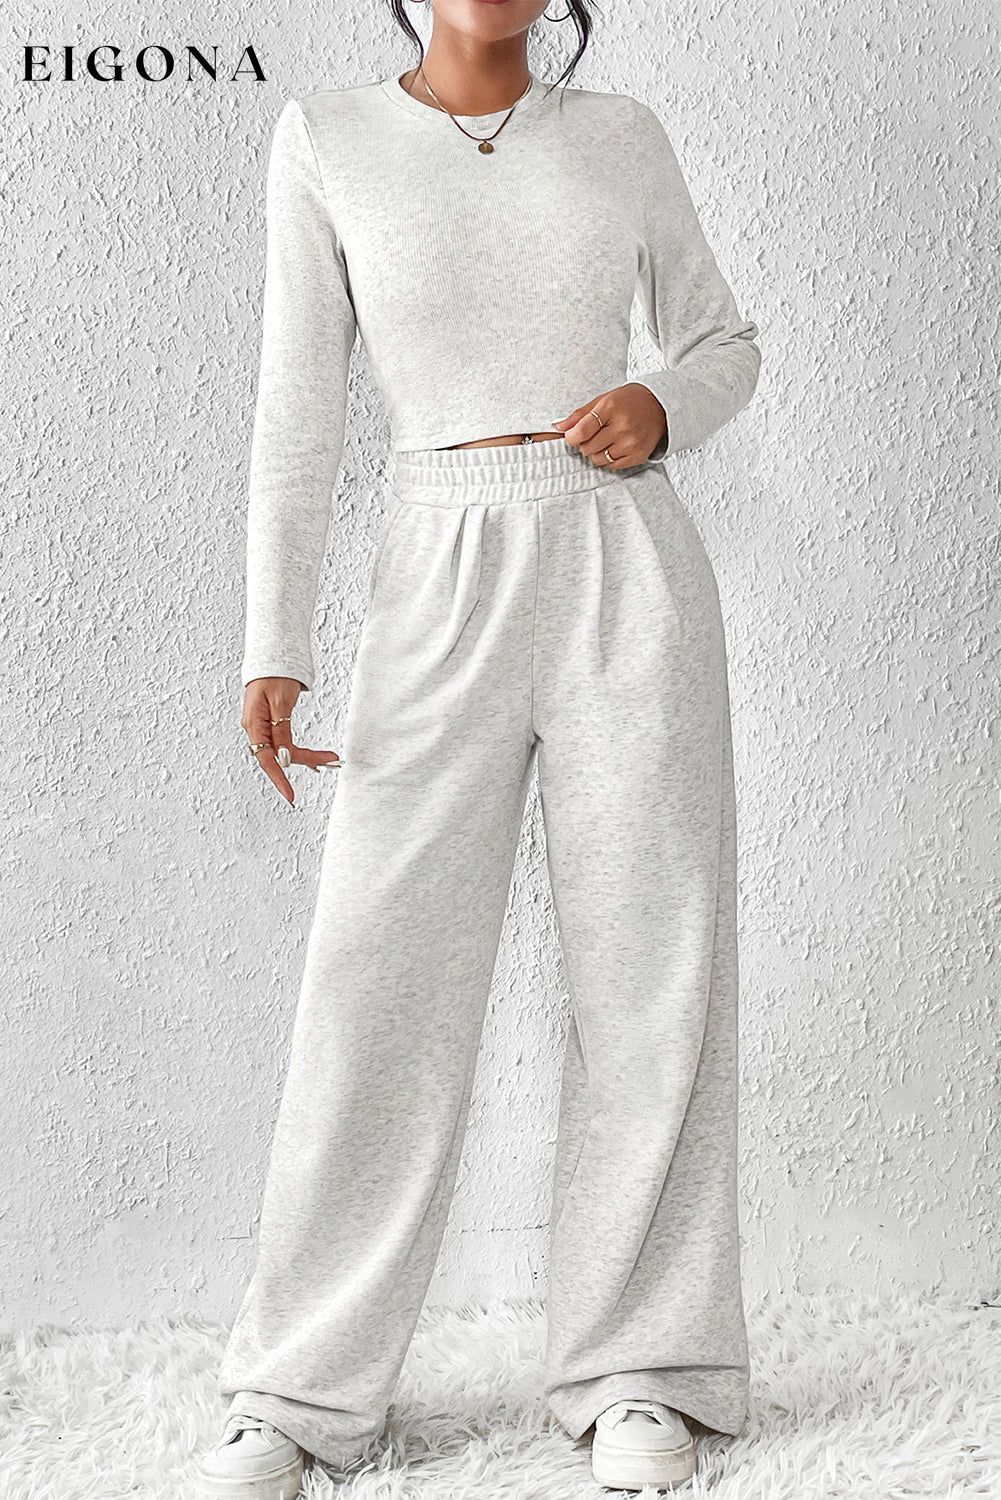 Beige Crop Top and Wide Leg Pants Two Piece Set All In Stock clothes EDM Monthly Recomend Hot picks lounge lounge wear lounge wear sets loungewear loungewear sets Occasion Daily Print Solid Color Season Winter sets Silhouette Wide Leg Style Casual